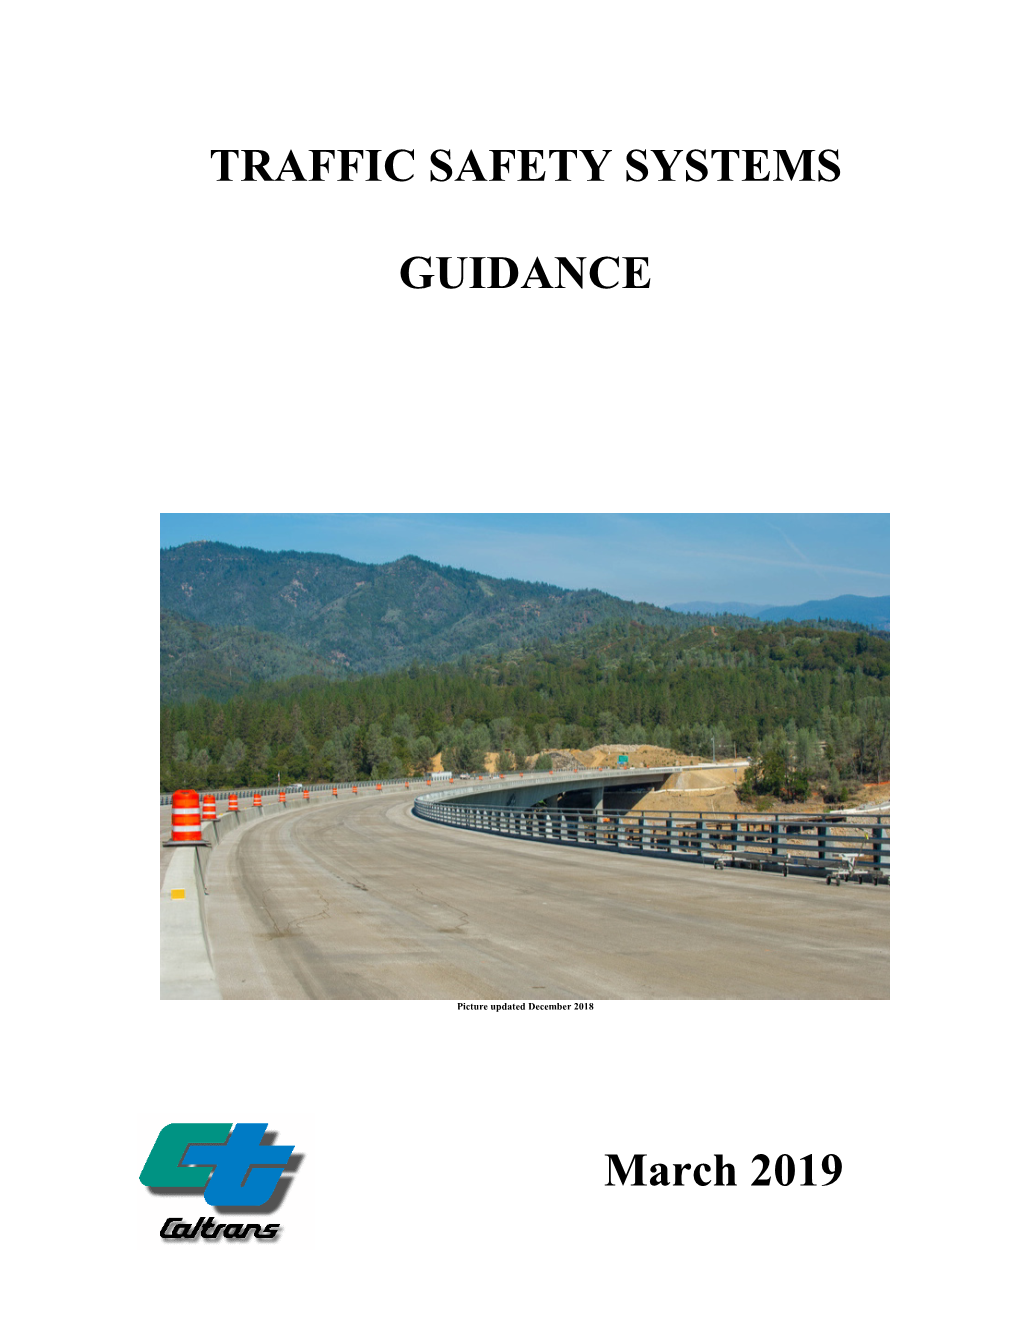 Traffic Safety Systems Guidance 2 0 3-2019